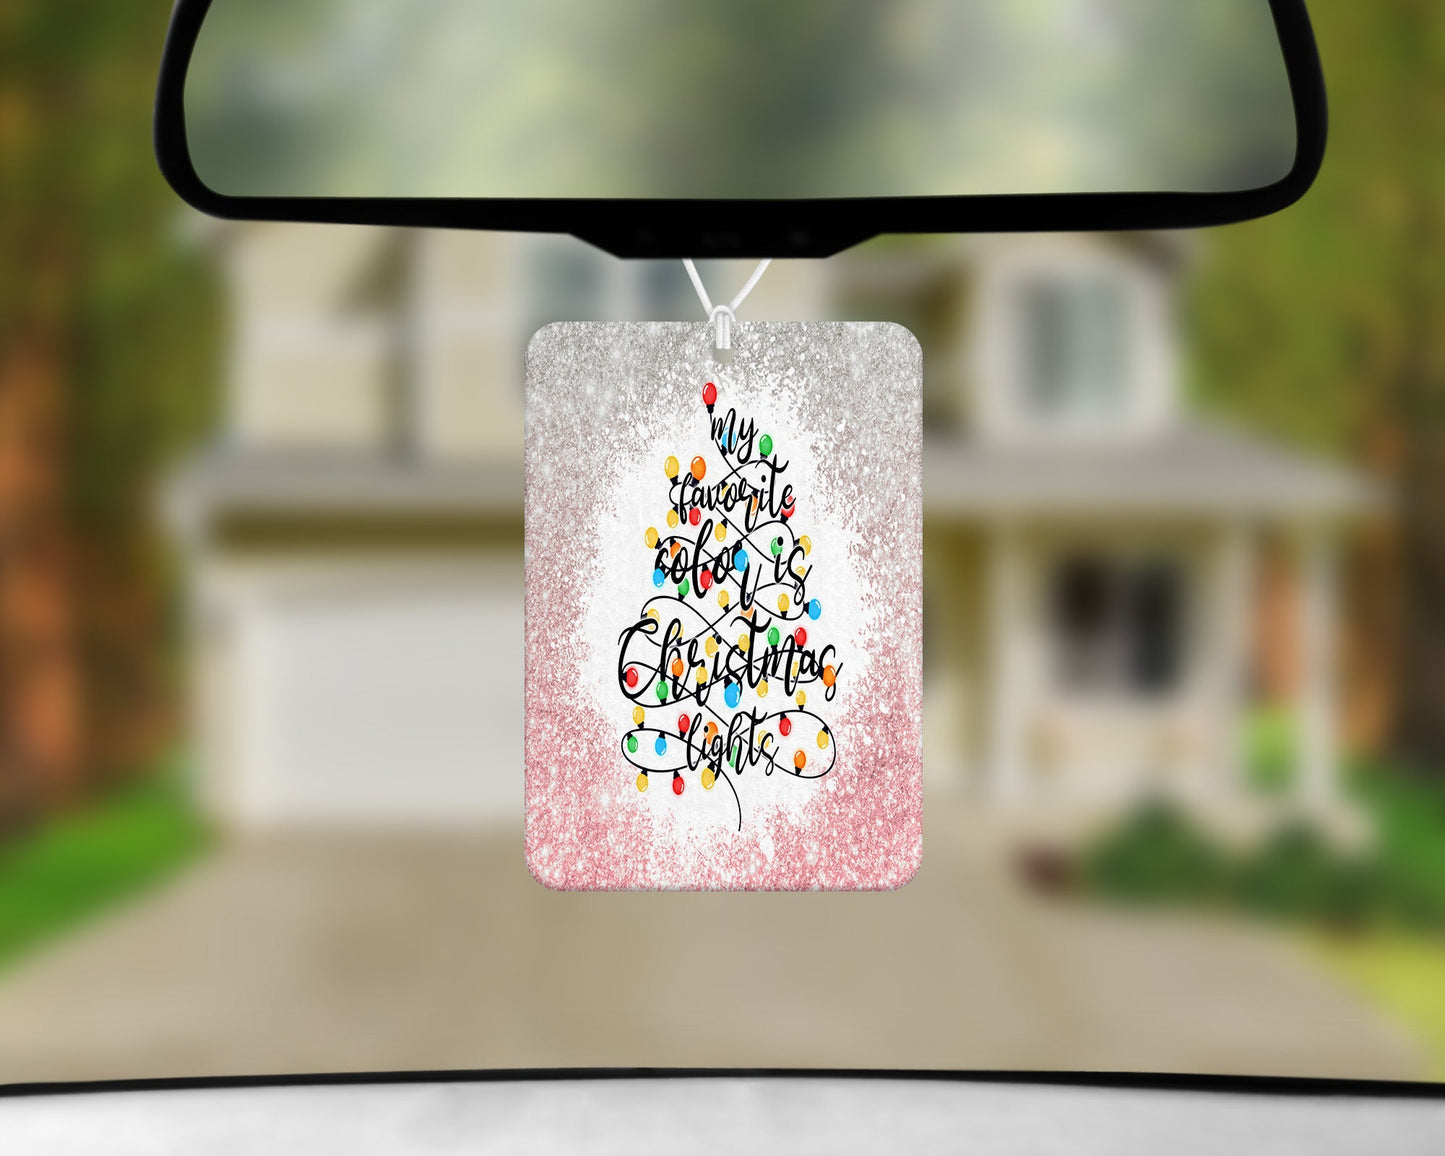 My Favorite Color Is Christmas Lights|Freshie|Includes Scent Bottle - Vehicle Air Freshener